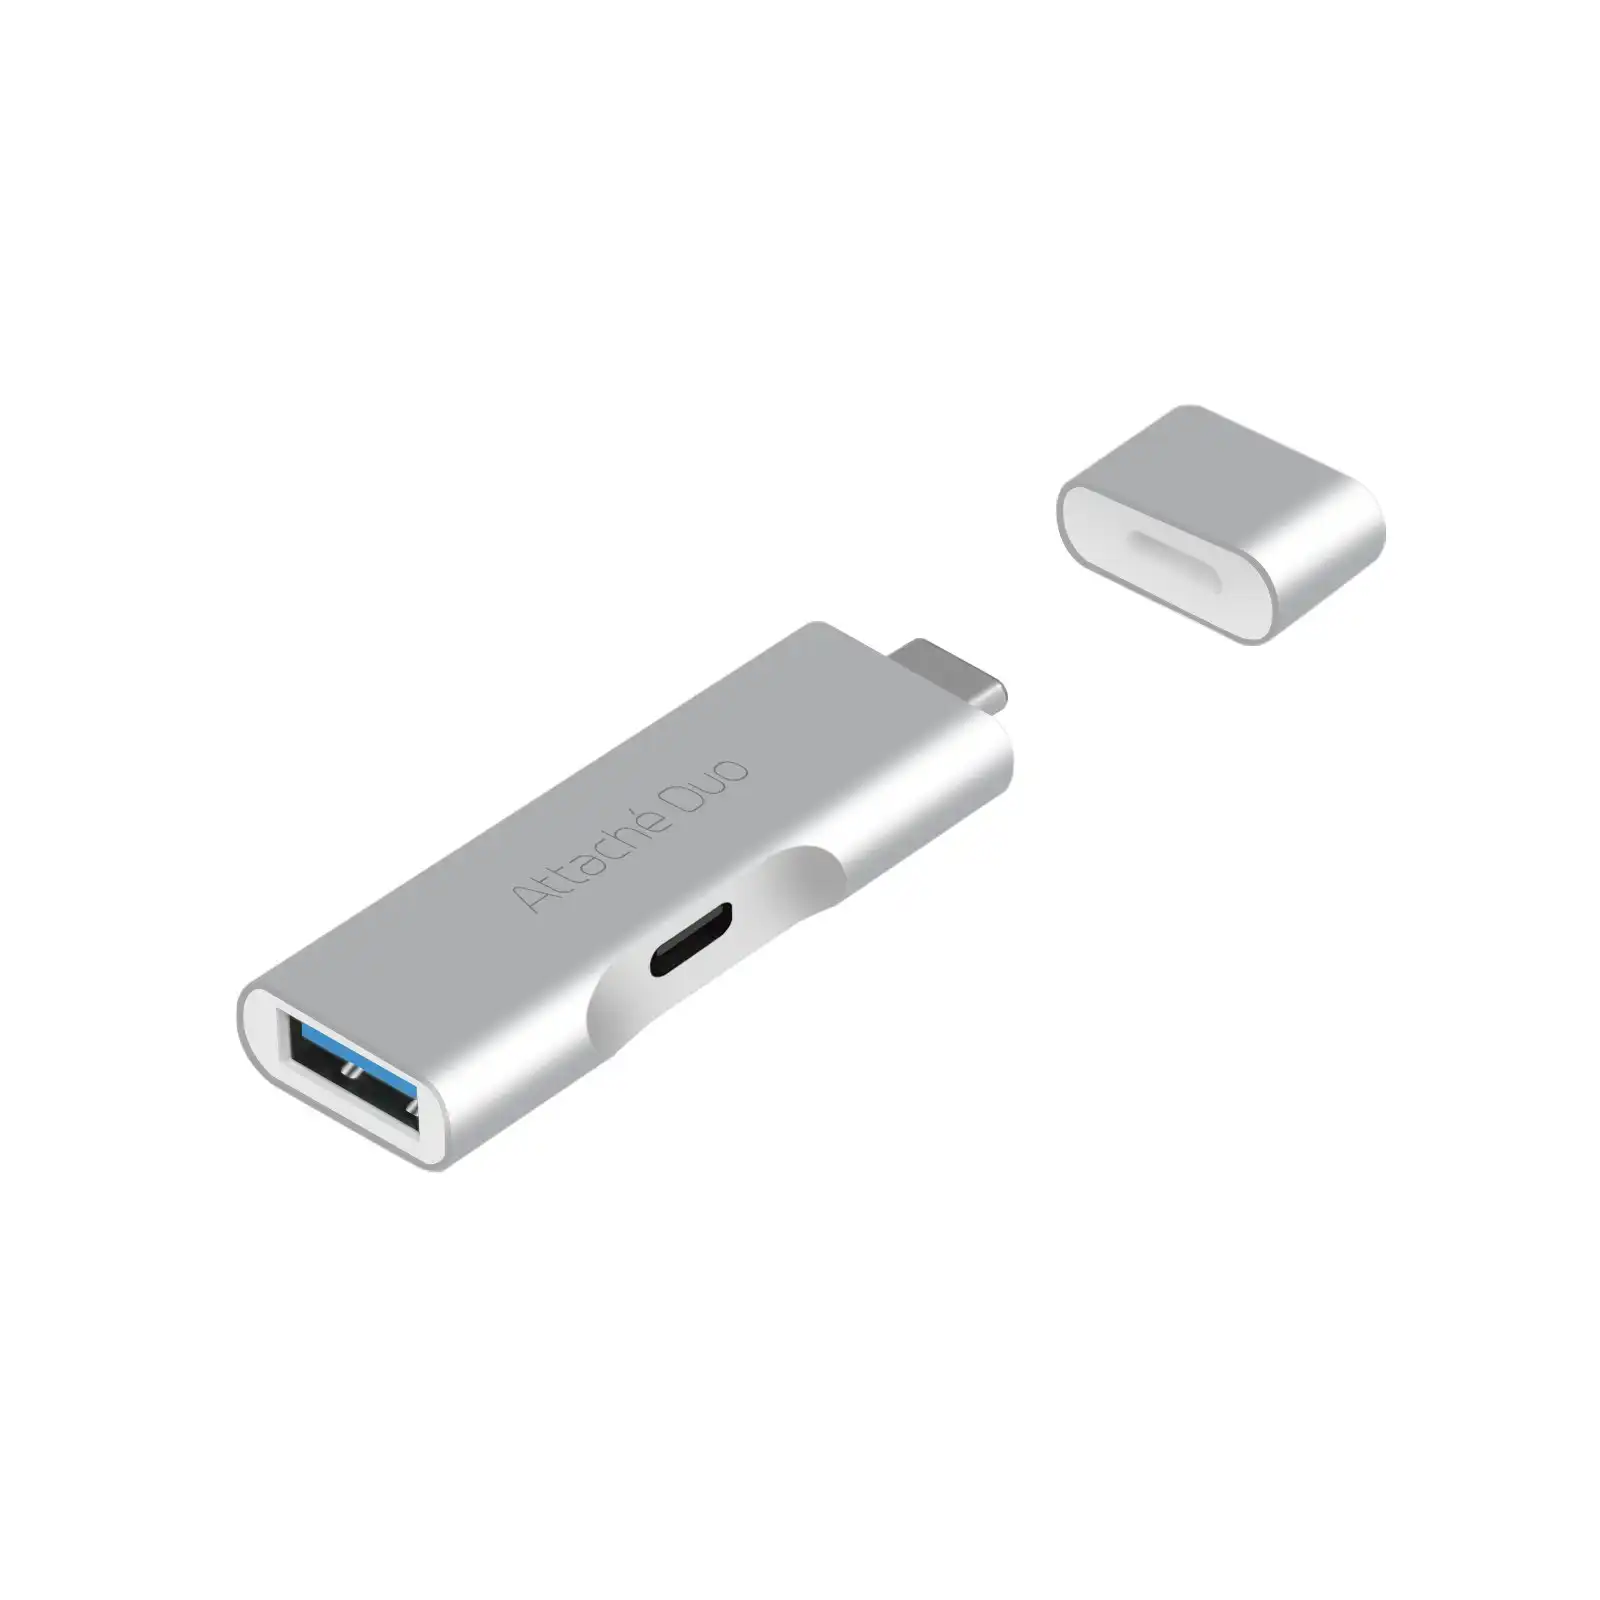 mBeat Attach Duo Type-c To Usb 3.1 Adapter With Usb-c Port - Grey